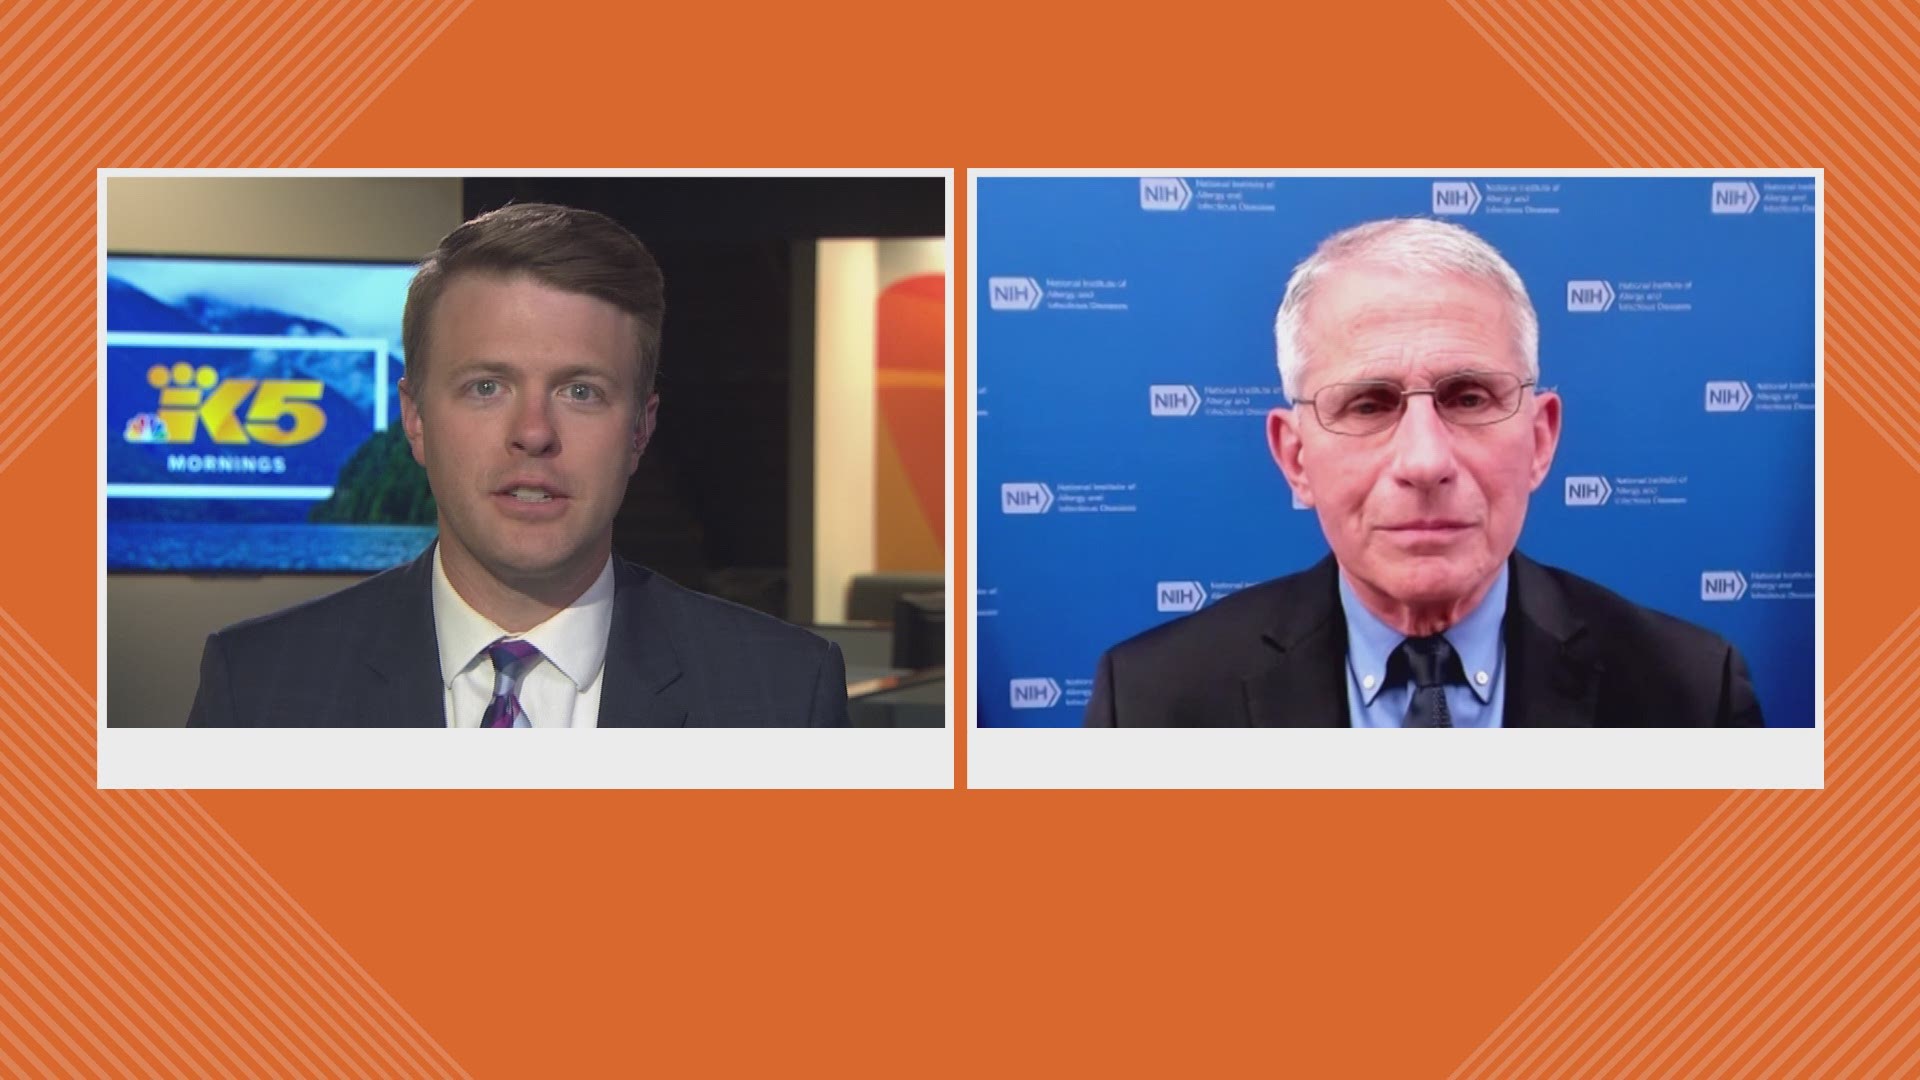 White House chief medical advisor Dr. Anthony Fauci discusses the pandemic and "the Fauci effect", the name for a recent uptick in medical school applications